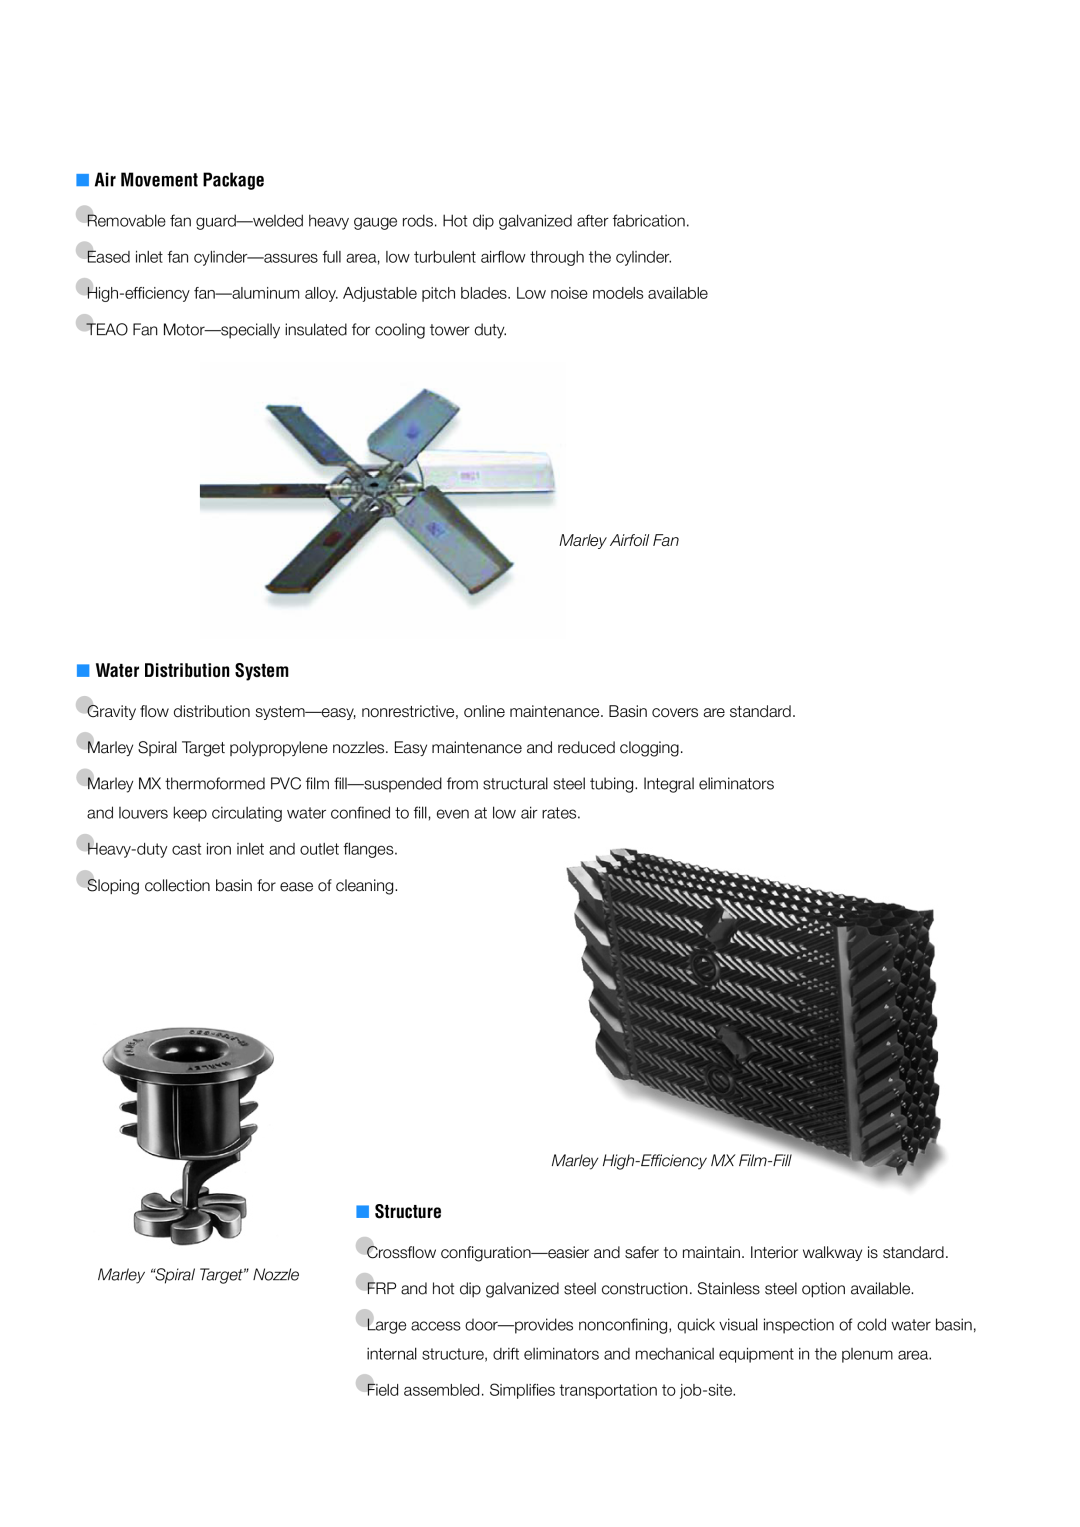 SPX Cooling Technologies NCF-06 manual Air Movement Package, Water Distribution System, Structure, Marley Airfoil Fan 